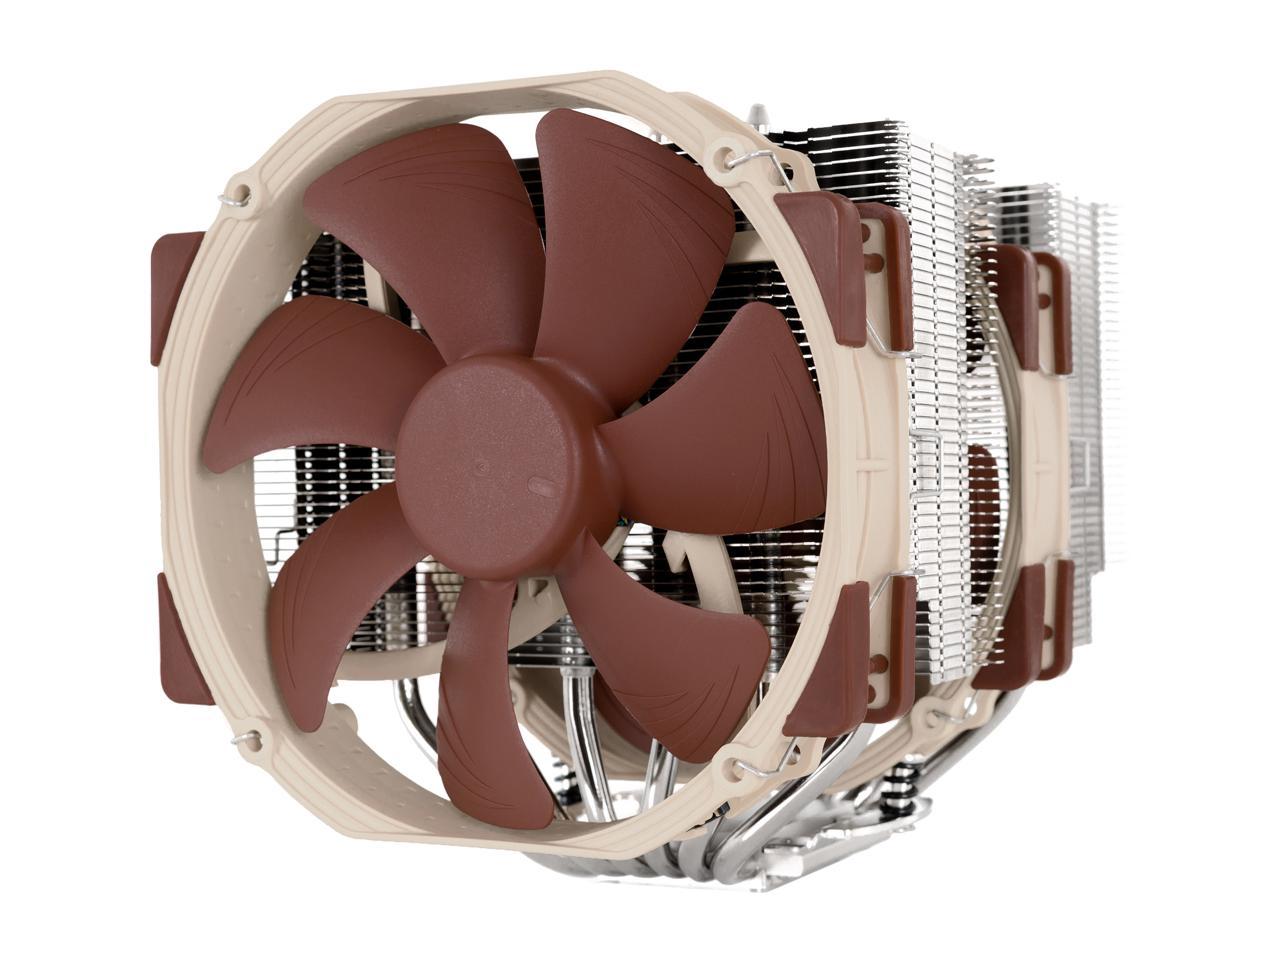  Noctua NH-D15S, Premium Dual-Tower CPU Cooler with NF